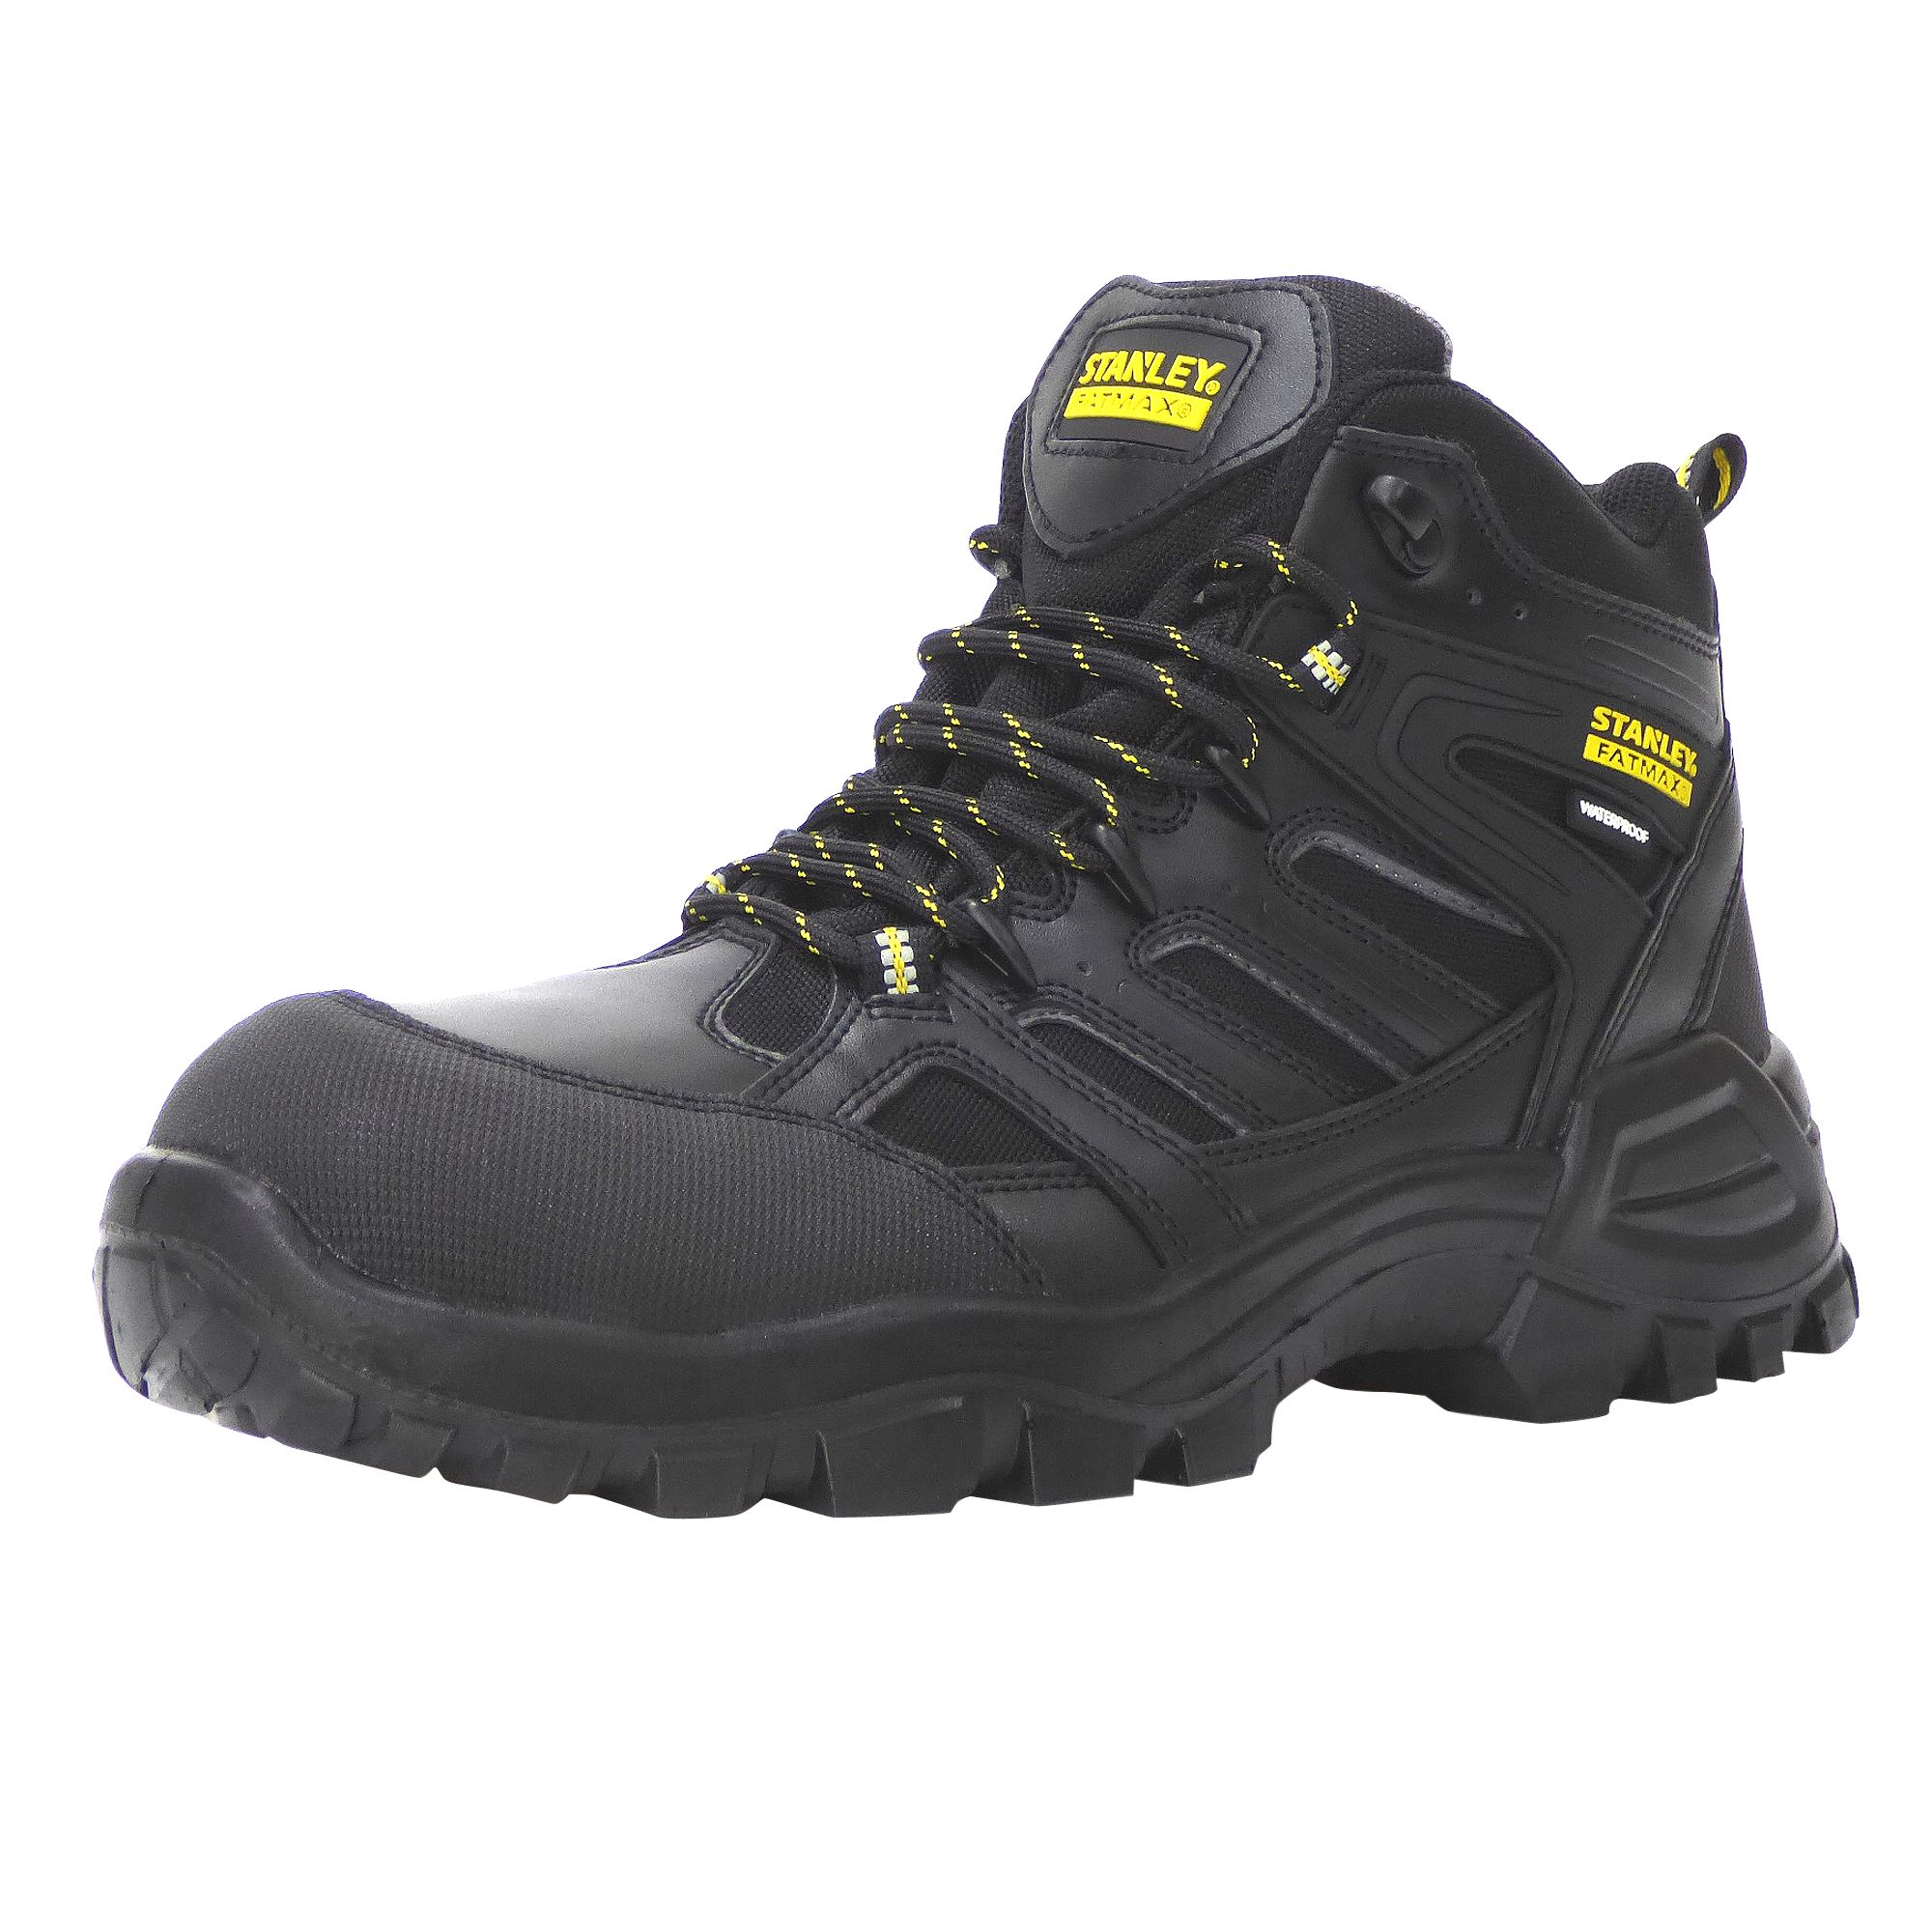 stanley fatmax ontario safety boots